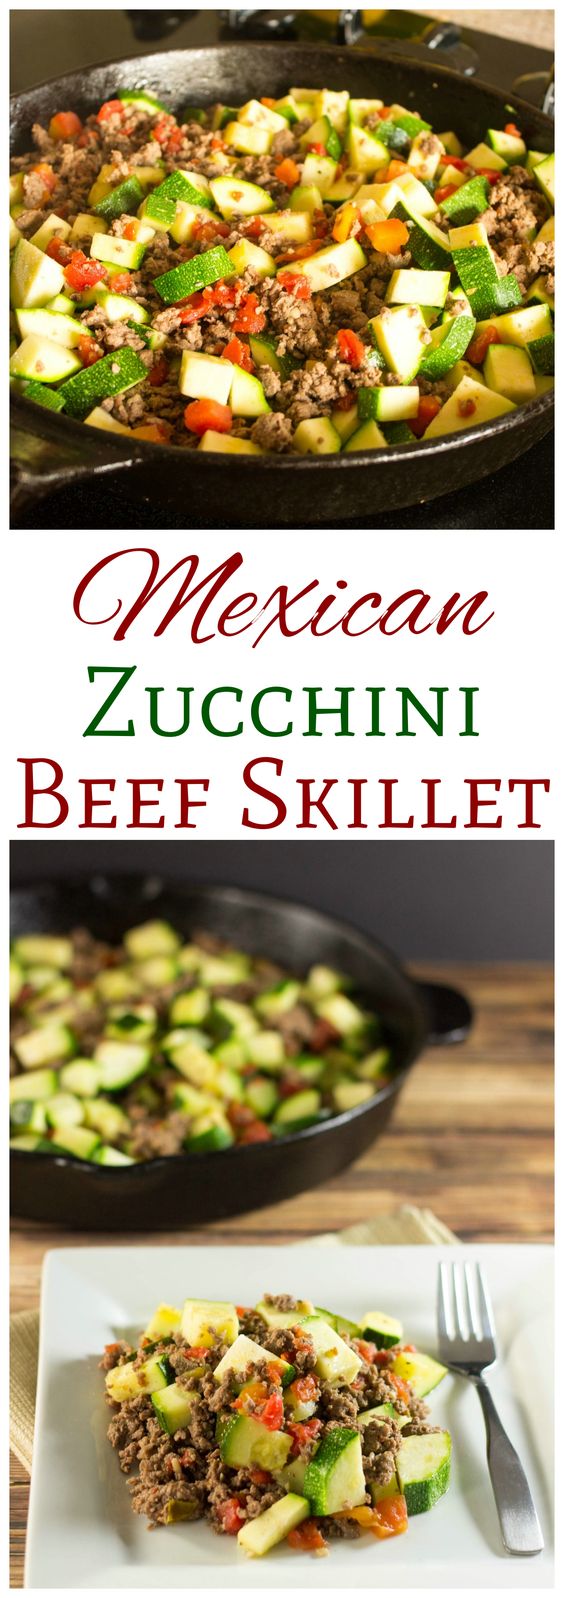 Best Mexican Zucchini And Beef Skillet